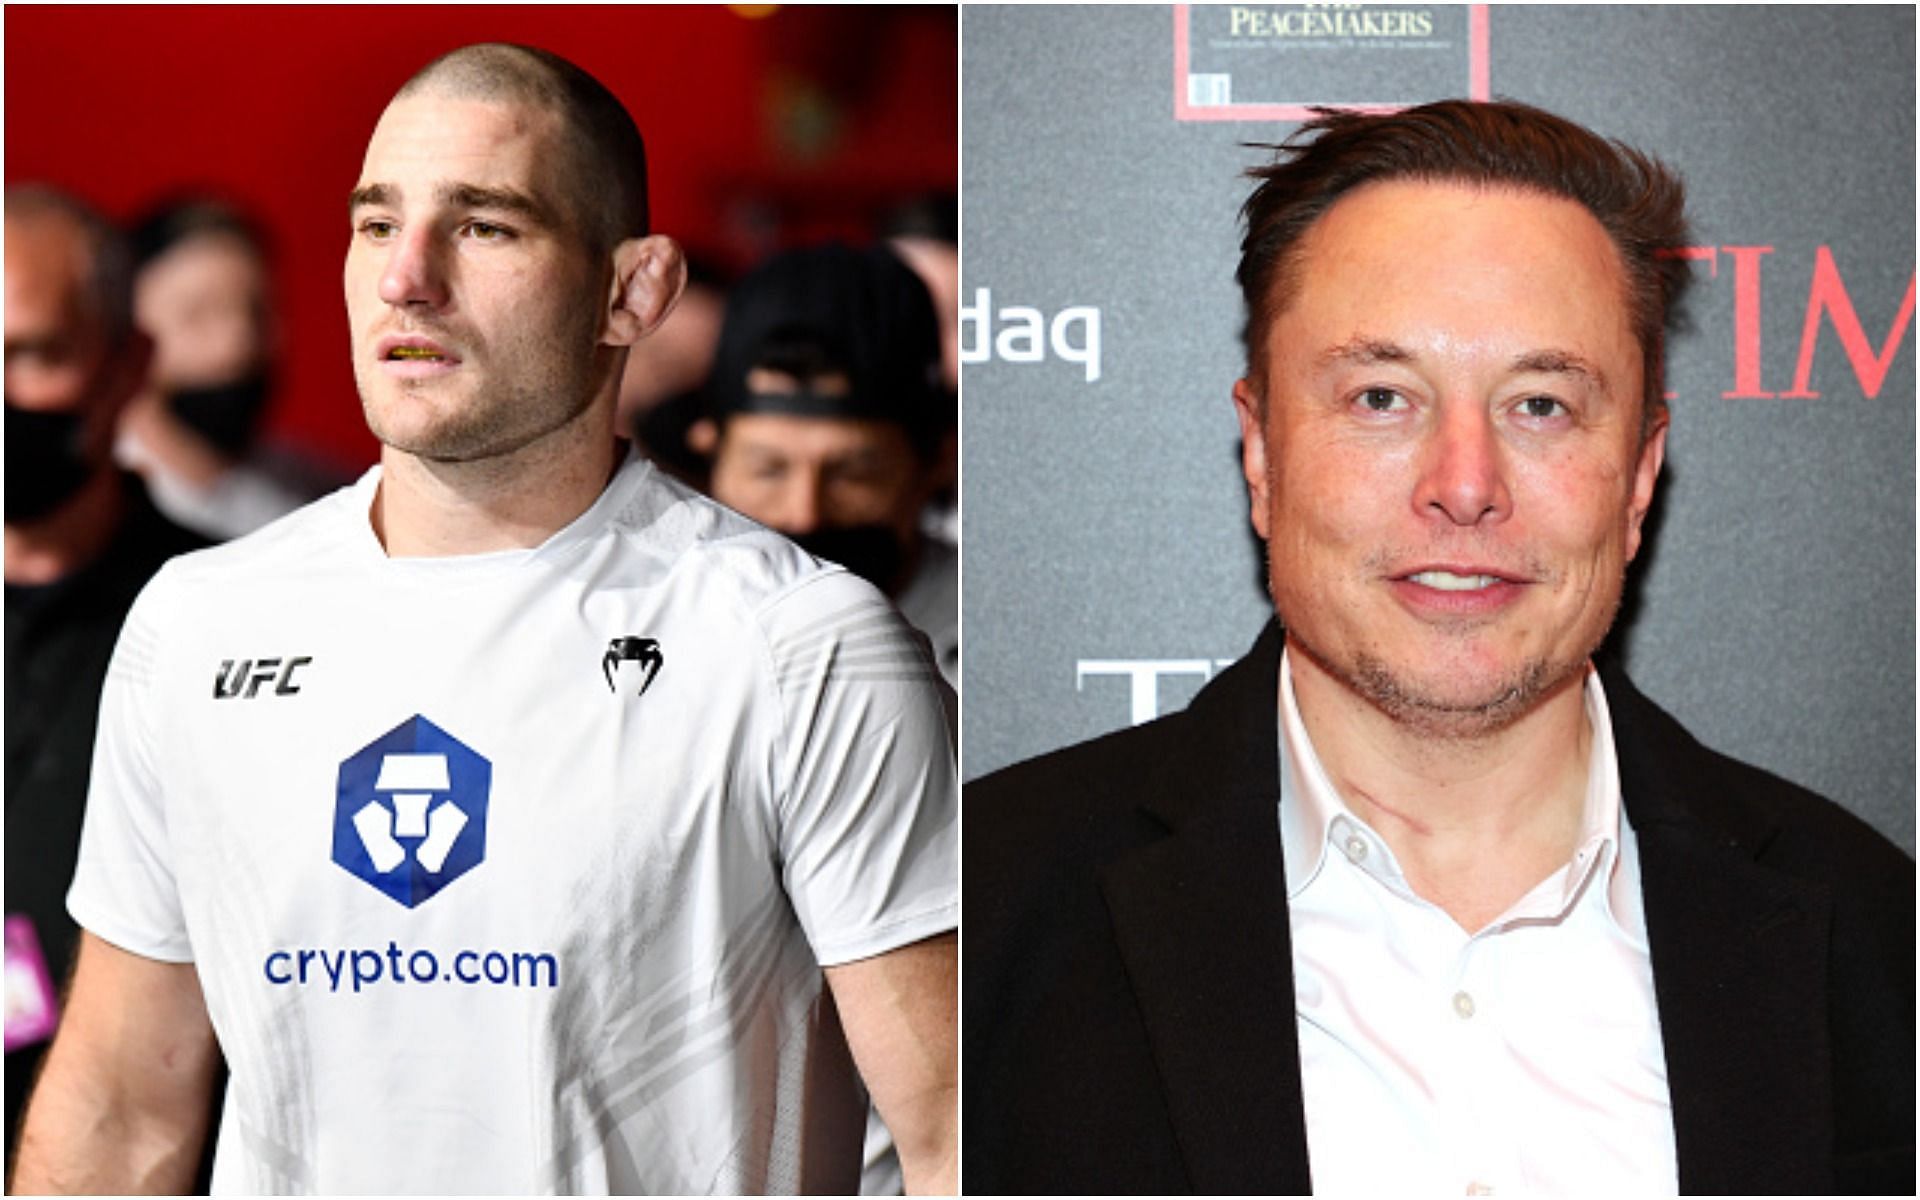 Sean Strickland (left), Elon Musk (right) [Photo Credits: Theo Wargo/Getty Images for TIME, Chris Unger/Zuffa LLC]